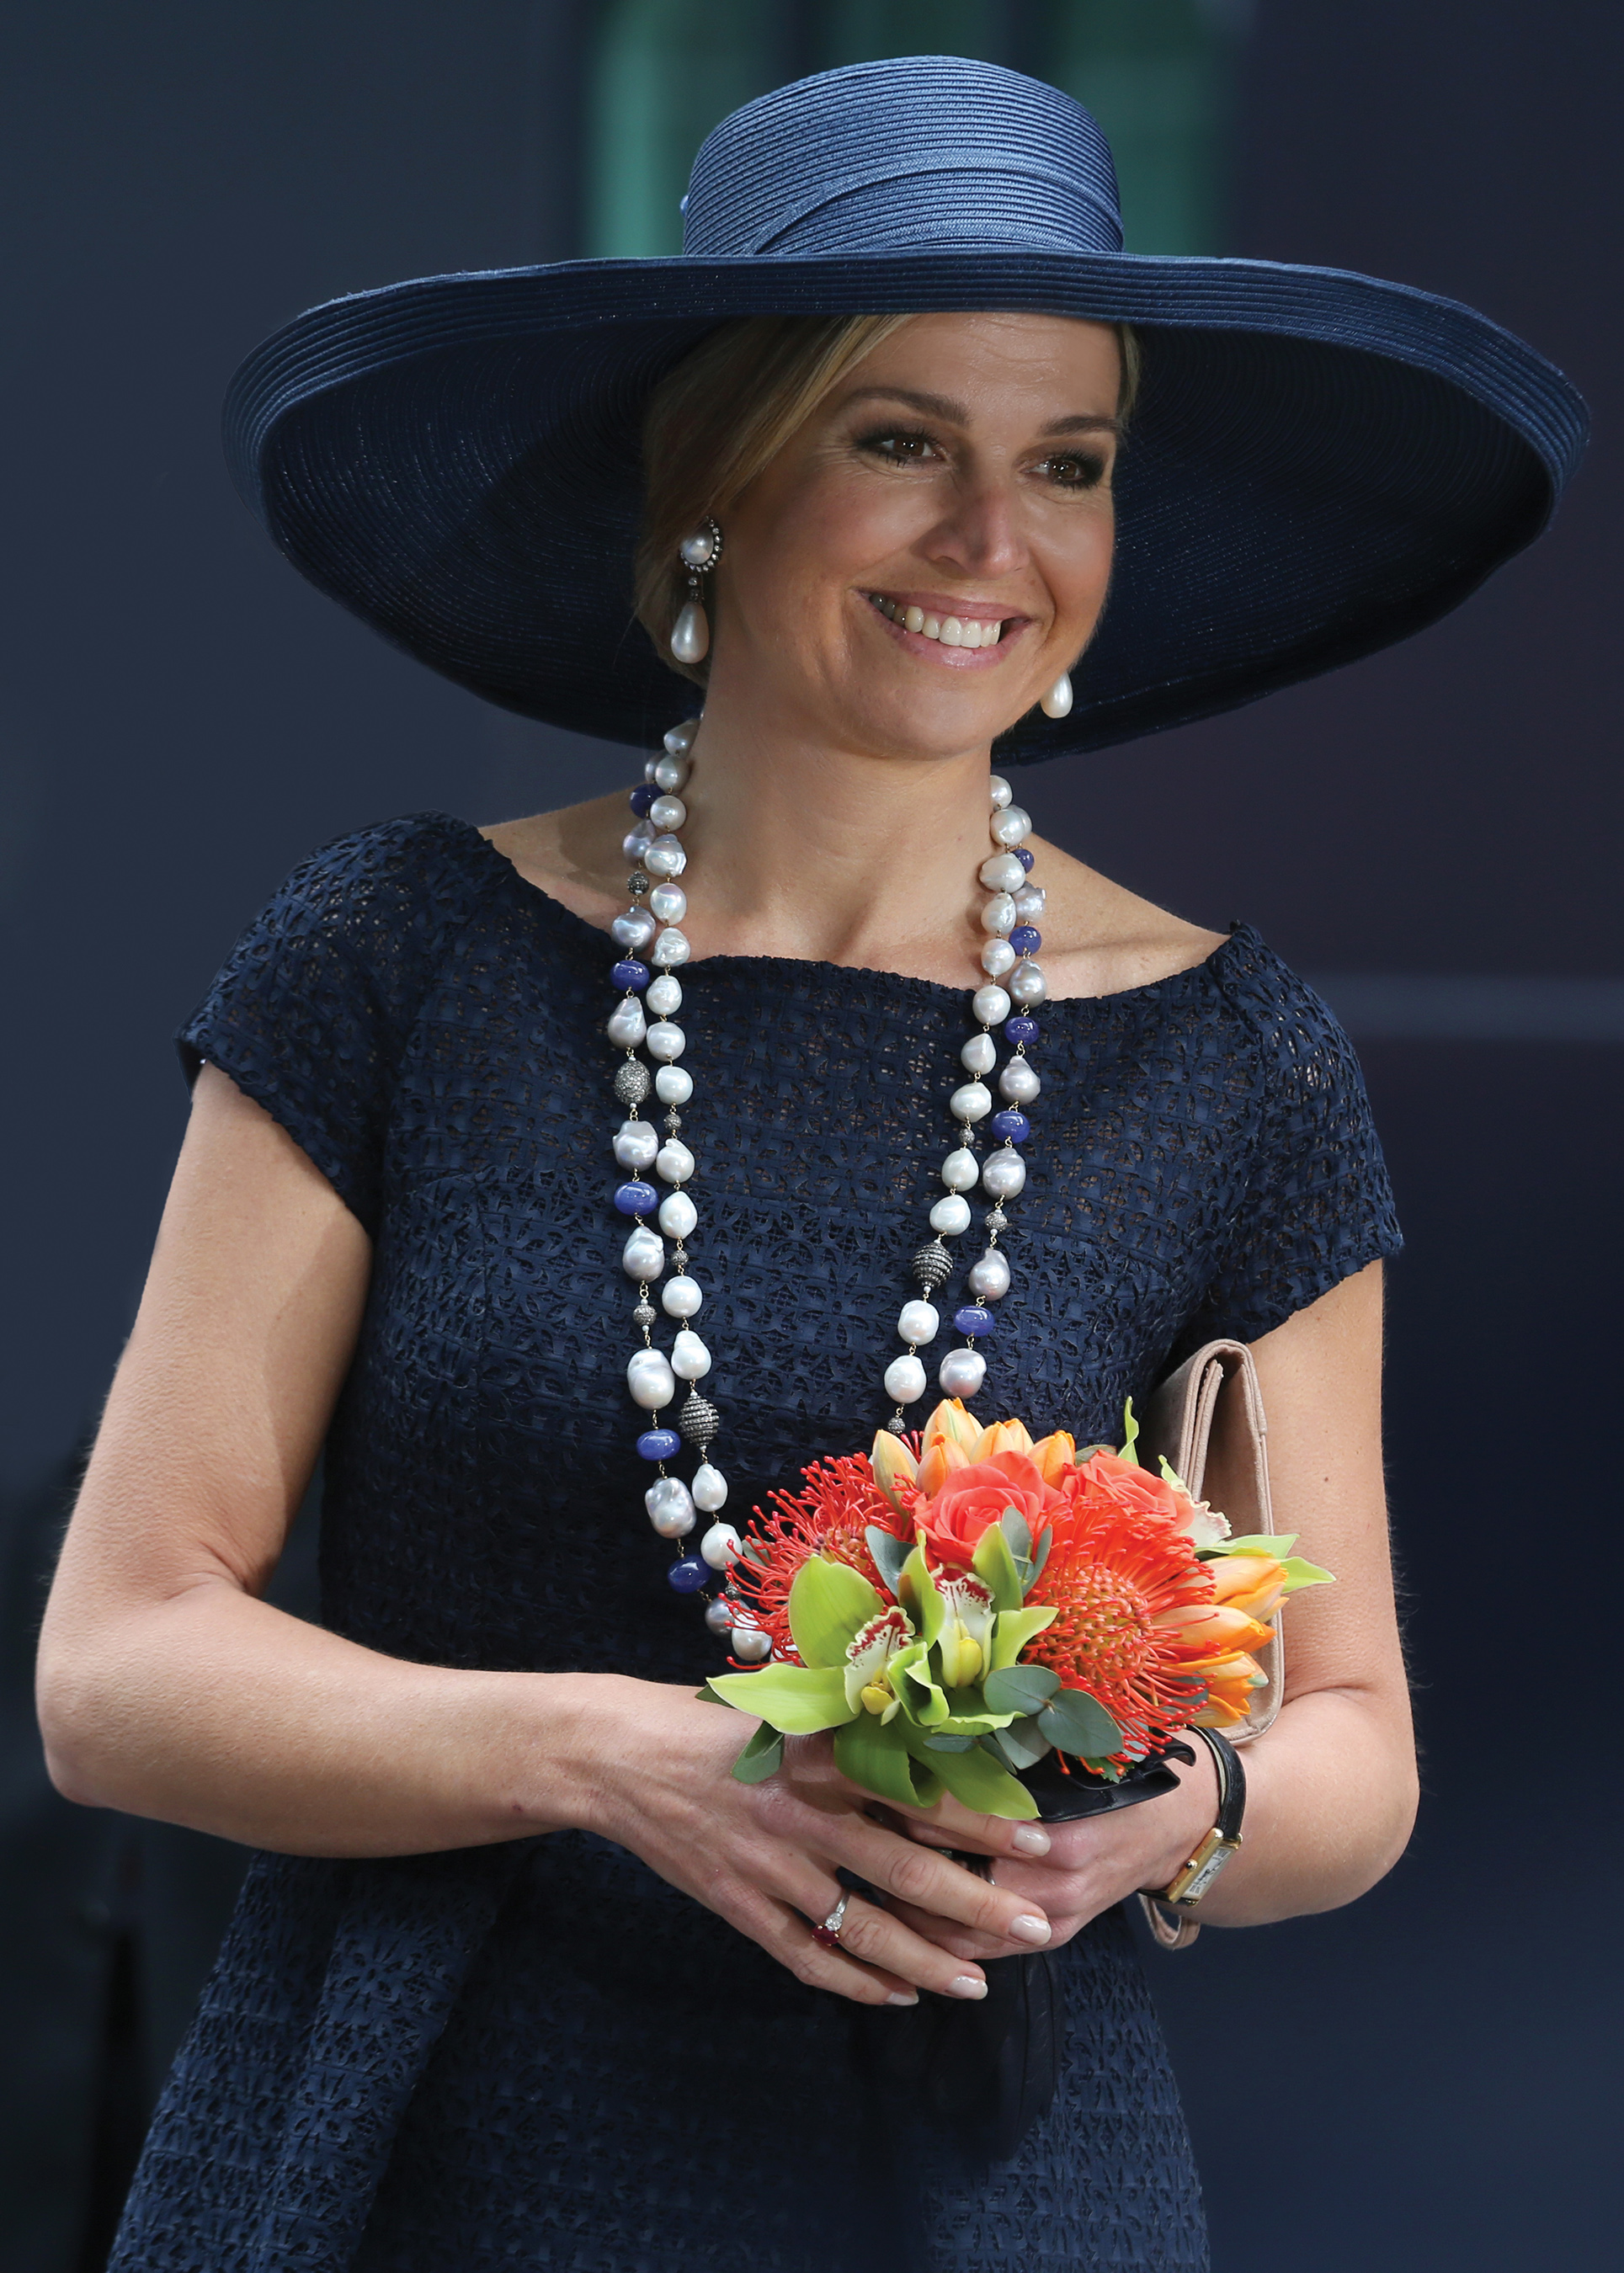 Her Majesty Queen Máxima of the Netherlands